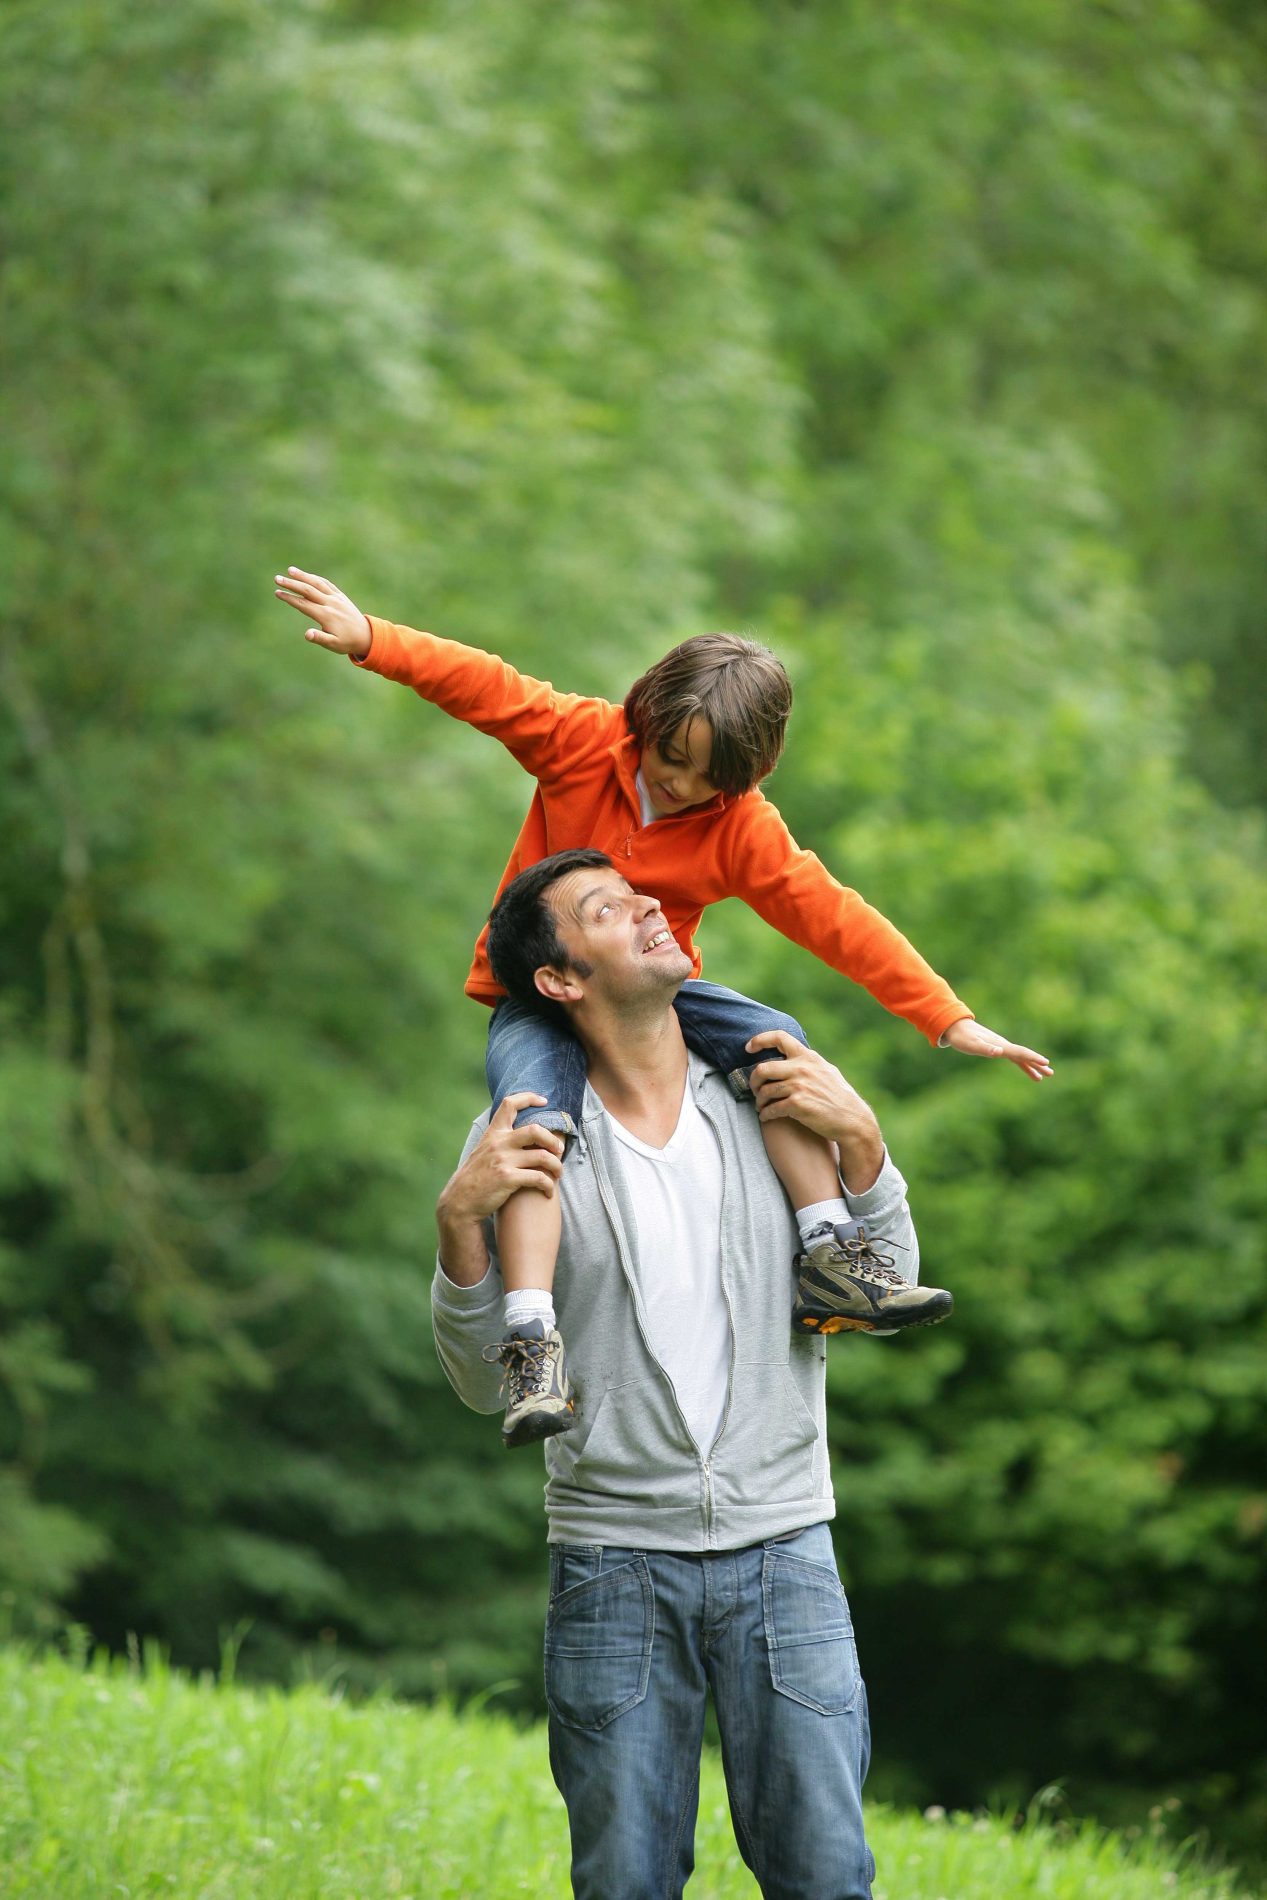 Photo of a man with son on his shoulders outdoors walking through a grassy area.